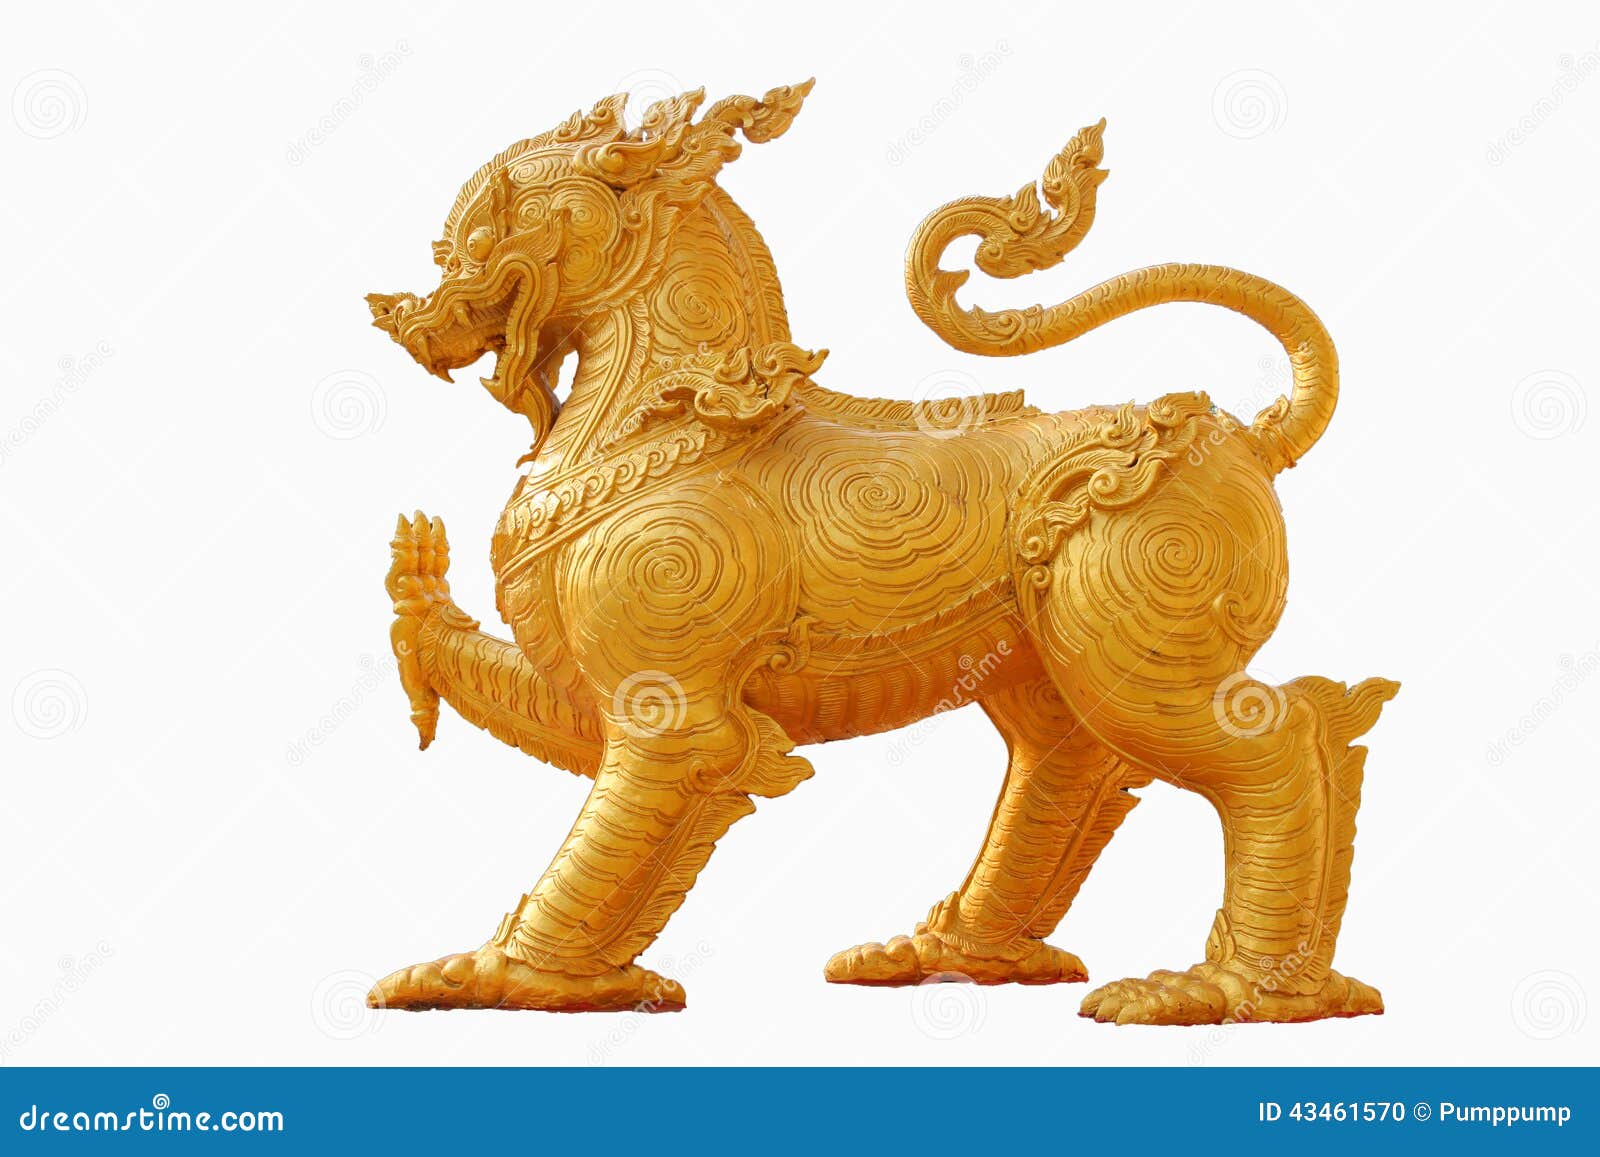 Gold Lion On White Background Stock Photo - Image of antique, golden